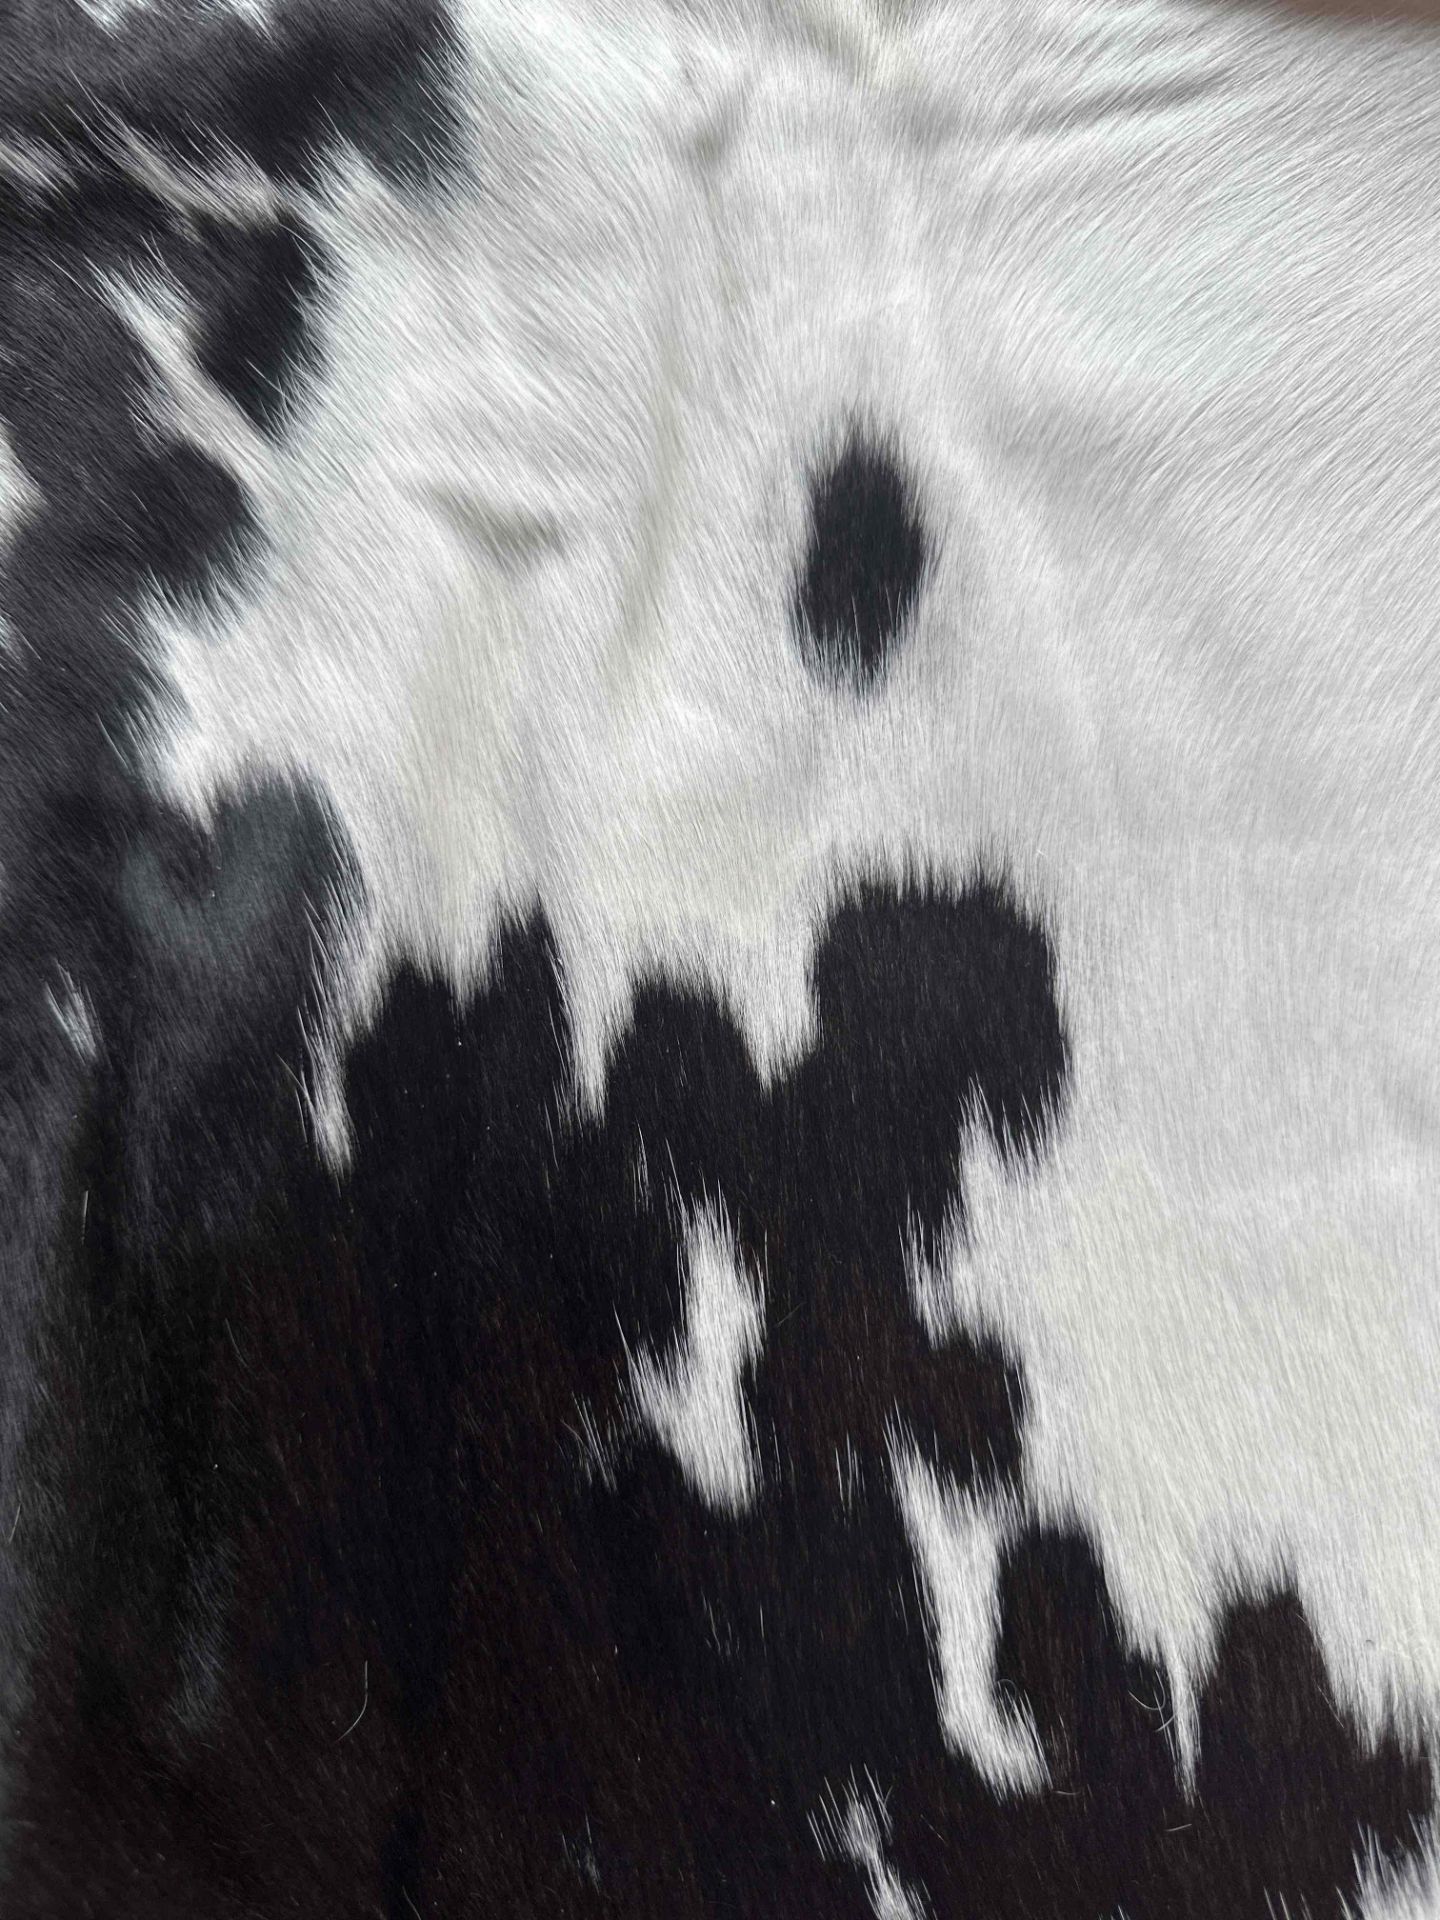 Cowhide Leather Cushion Cover 100% NaturalÂ Cowhide Leather Cushion Is Single-Sided And Rich In - Image 2 of 3